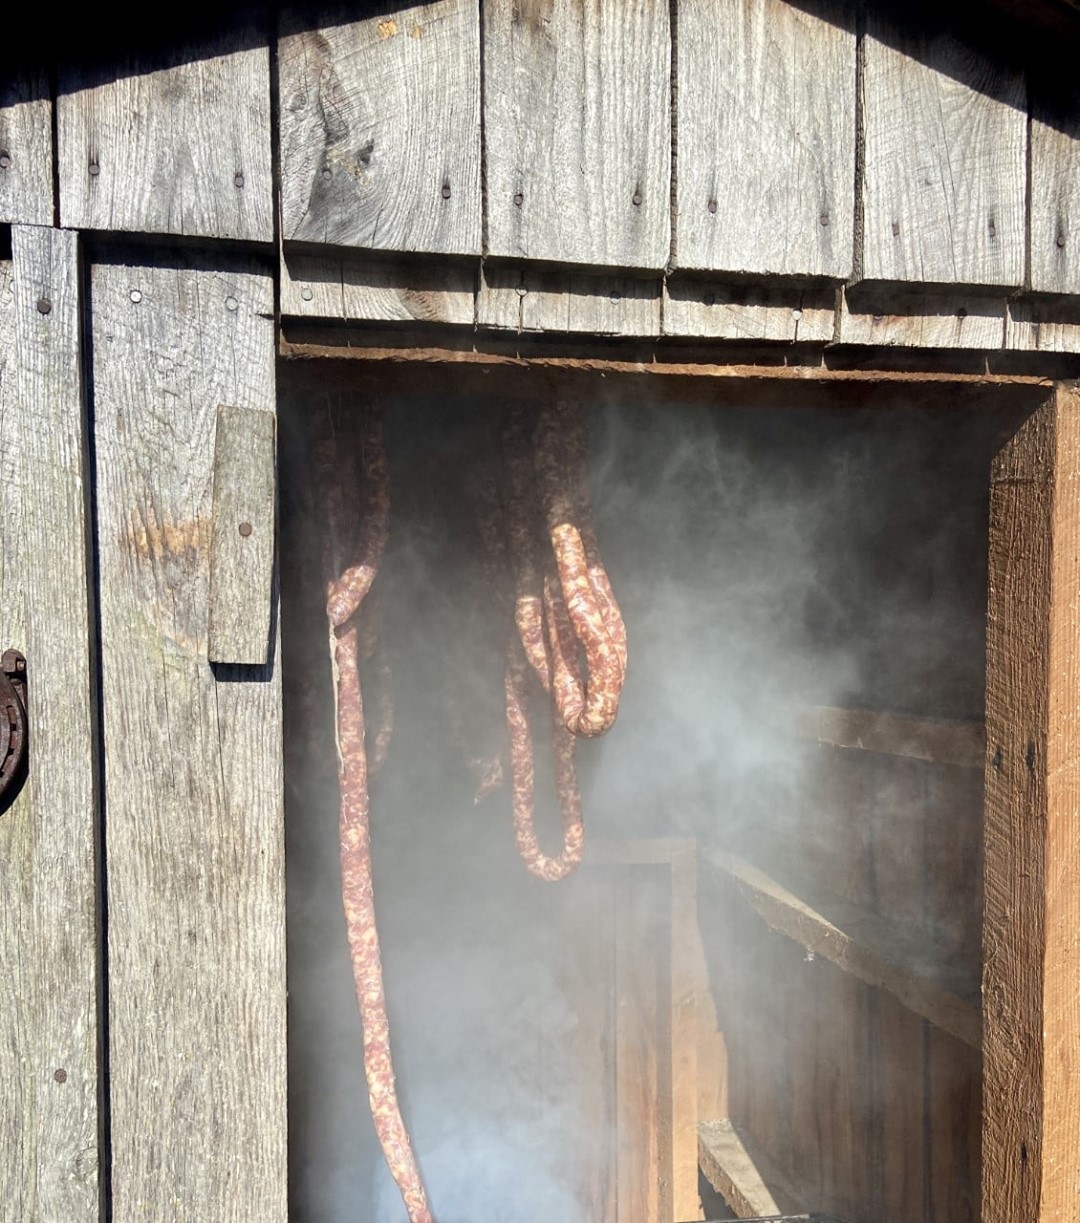 #HVAgventures destination Rimmey Rd. Farm's shop will be open Saturday, March 6 from 9 a.m. - 3 p.m.
˙
They are hard at work getting ready for the sale. Enjoy BBQ pulled pork (locally raised) sandwiches on their homemade kimmelweck rolls, smoked ribs, sau